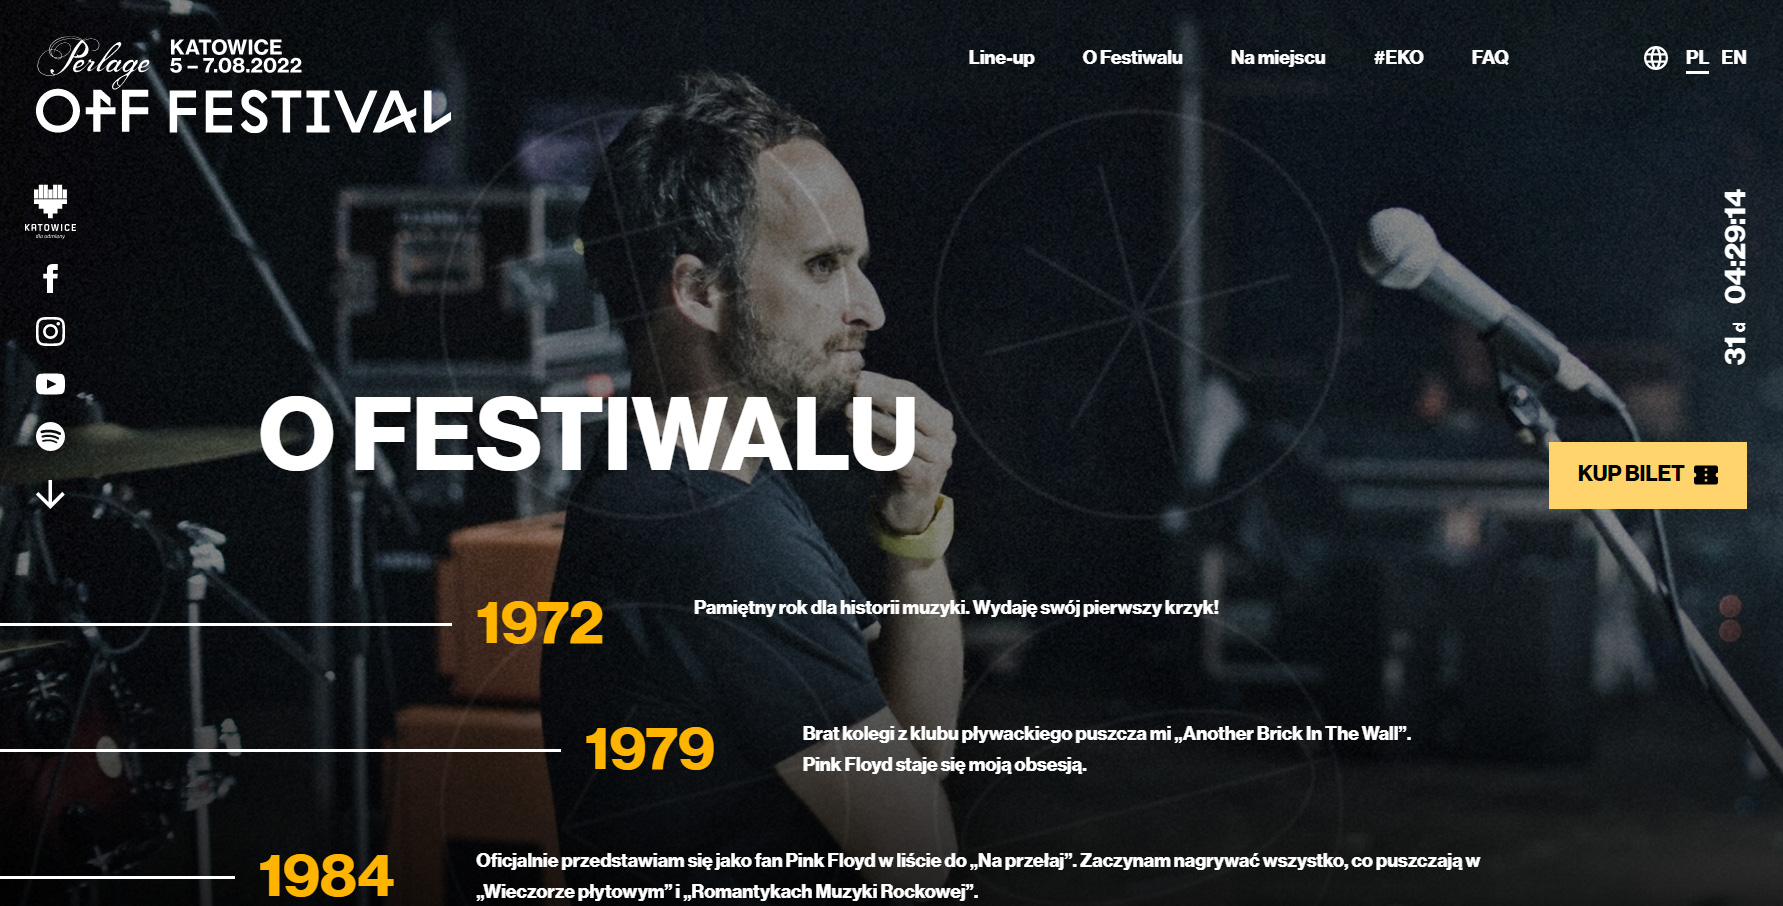 OFF Festival - Website of the Day